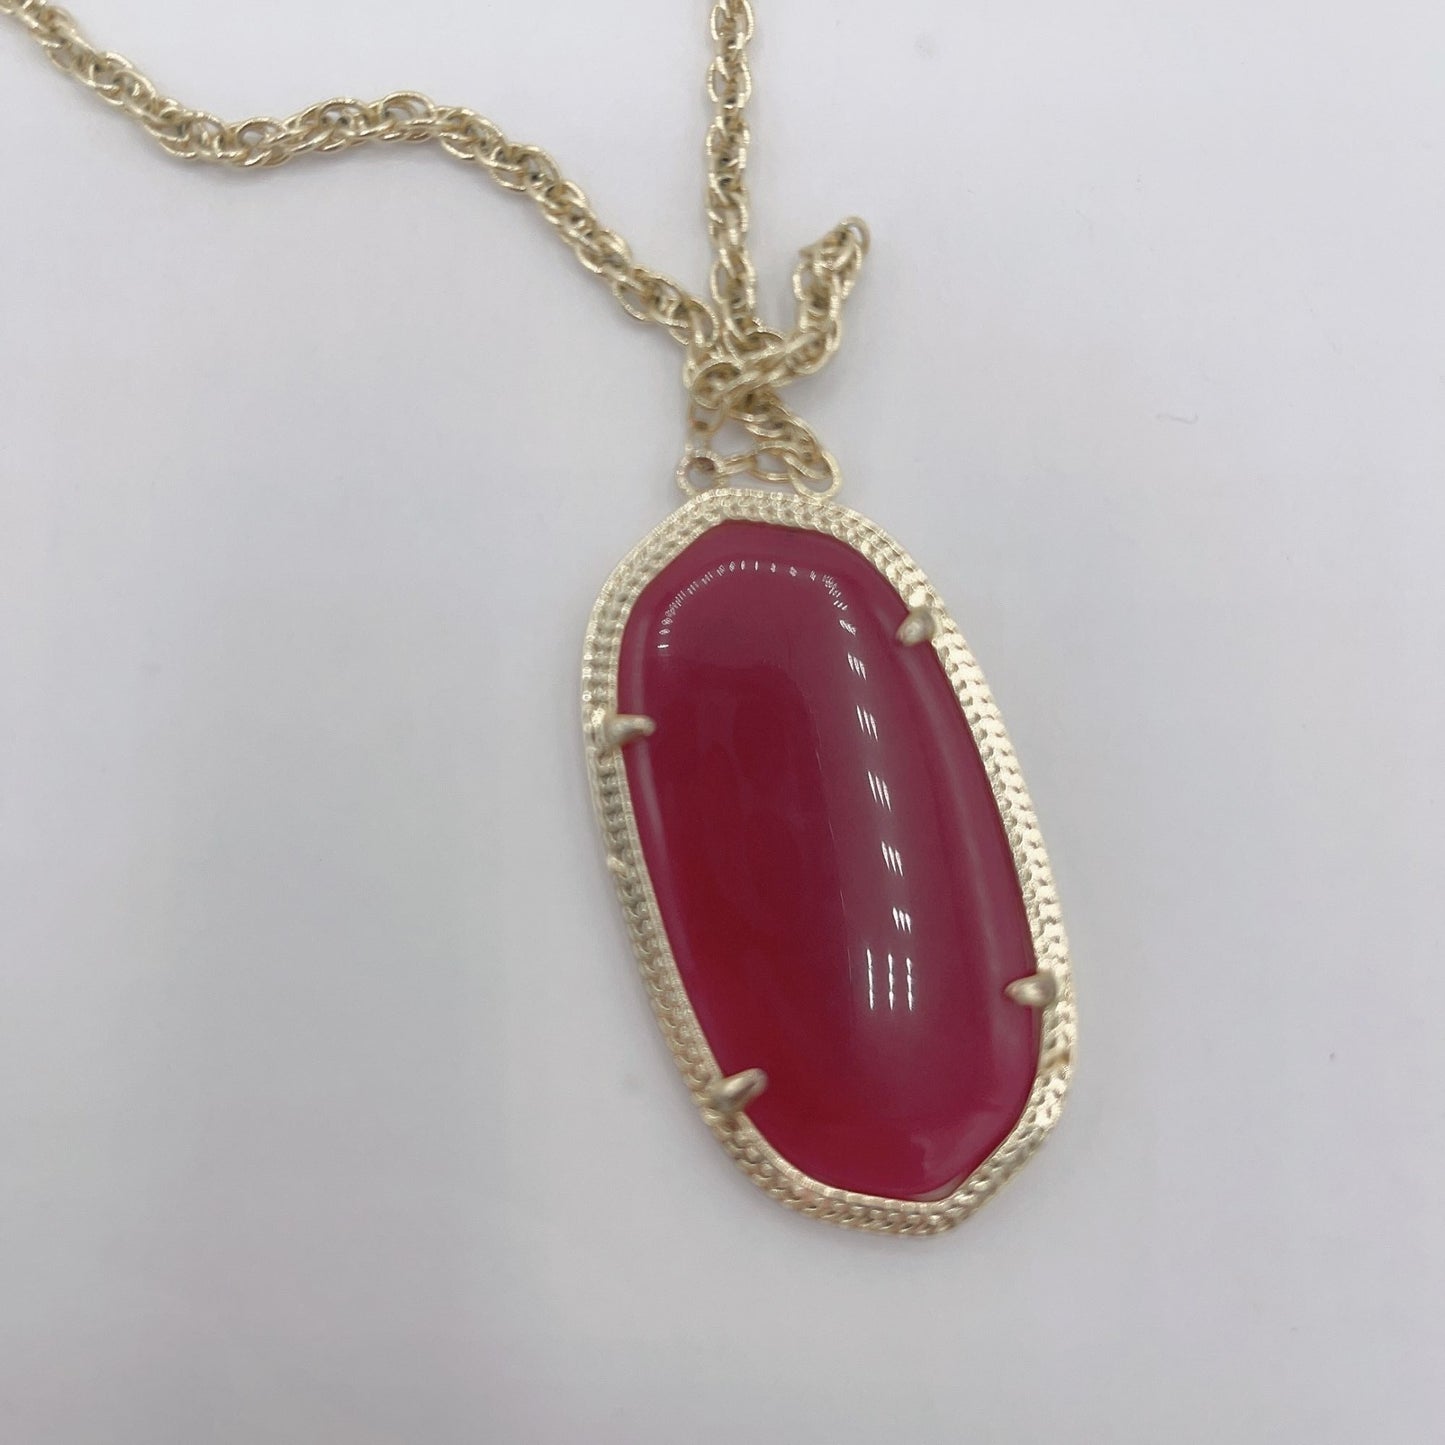 Kendra Scott Red Oval Stone Short Necklace